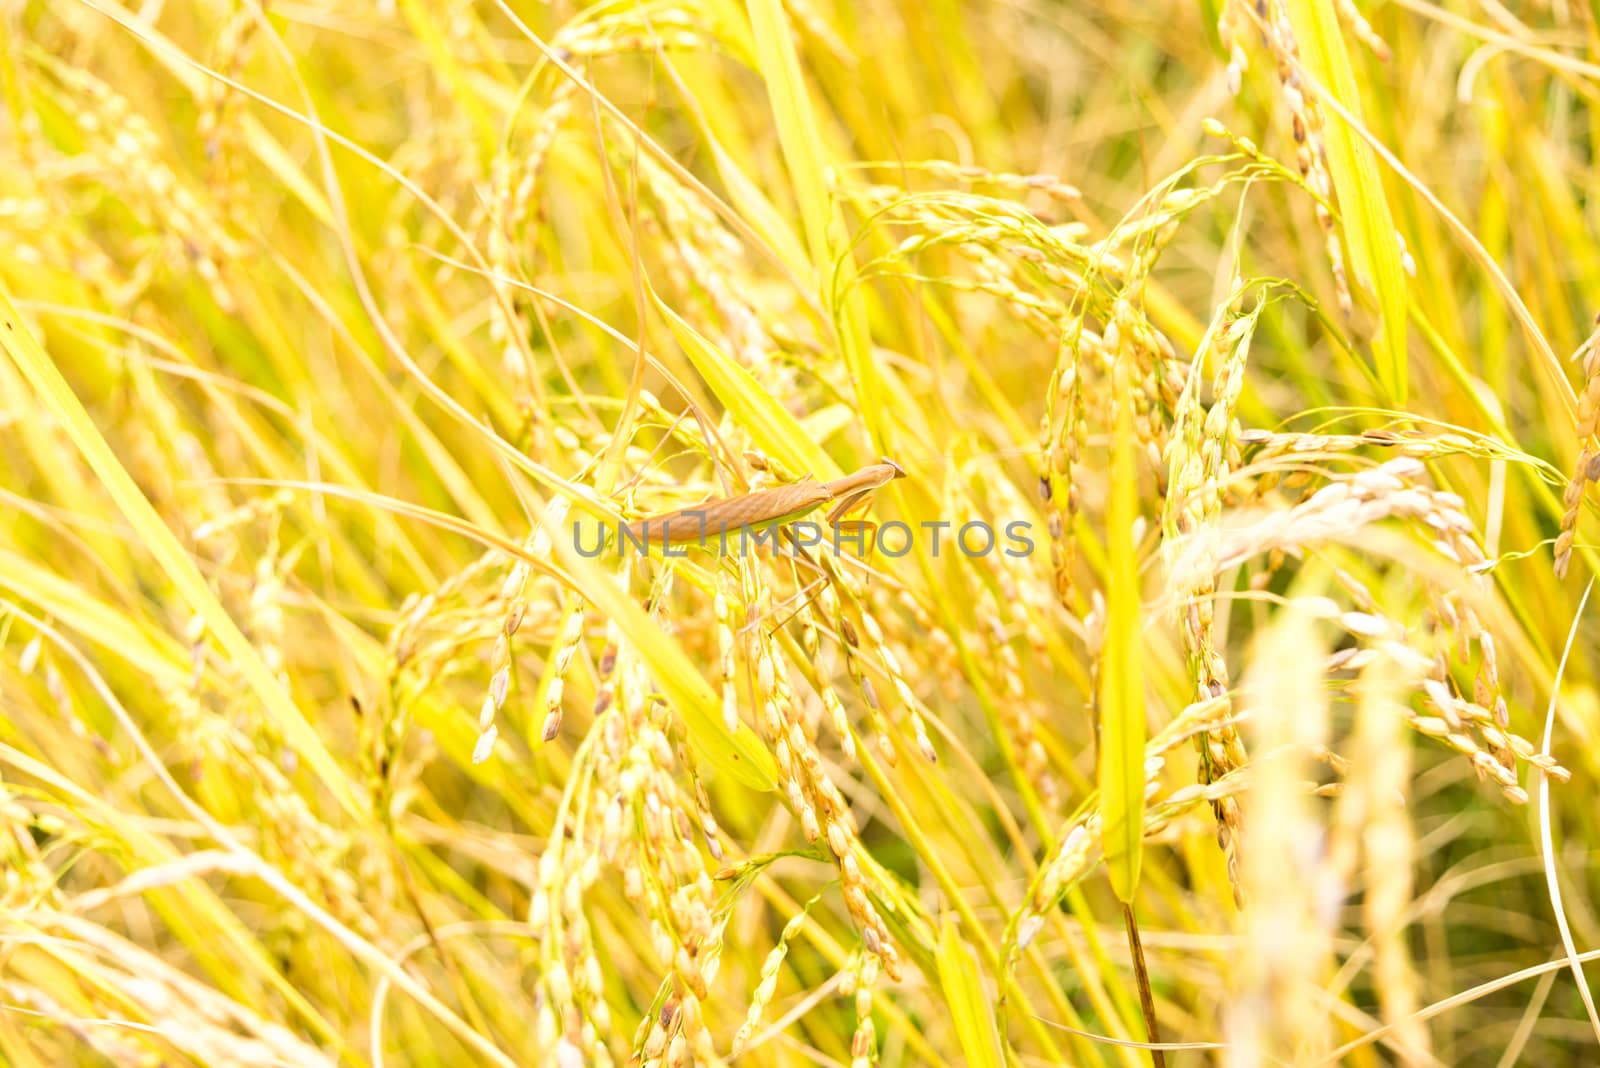 Grasshoppers in rice fields on the top of spike